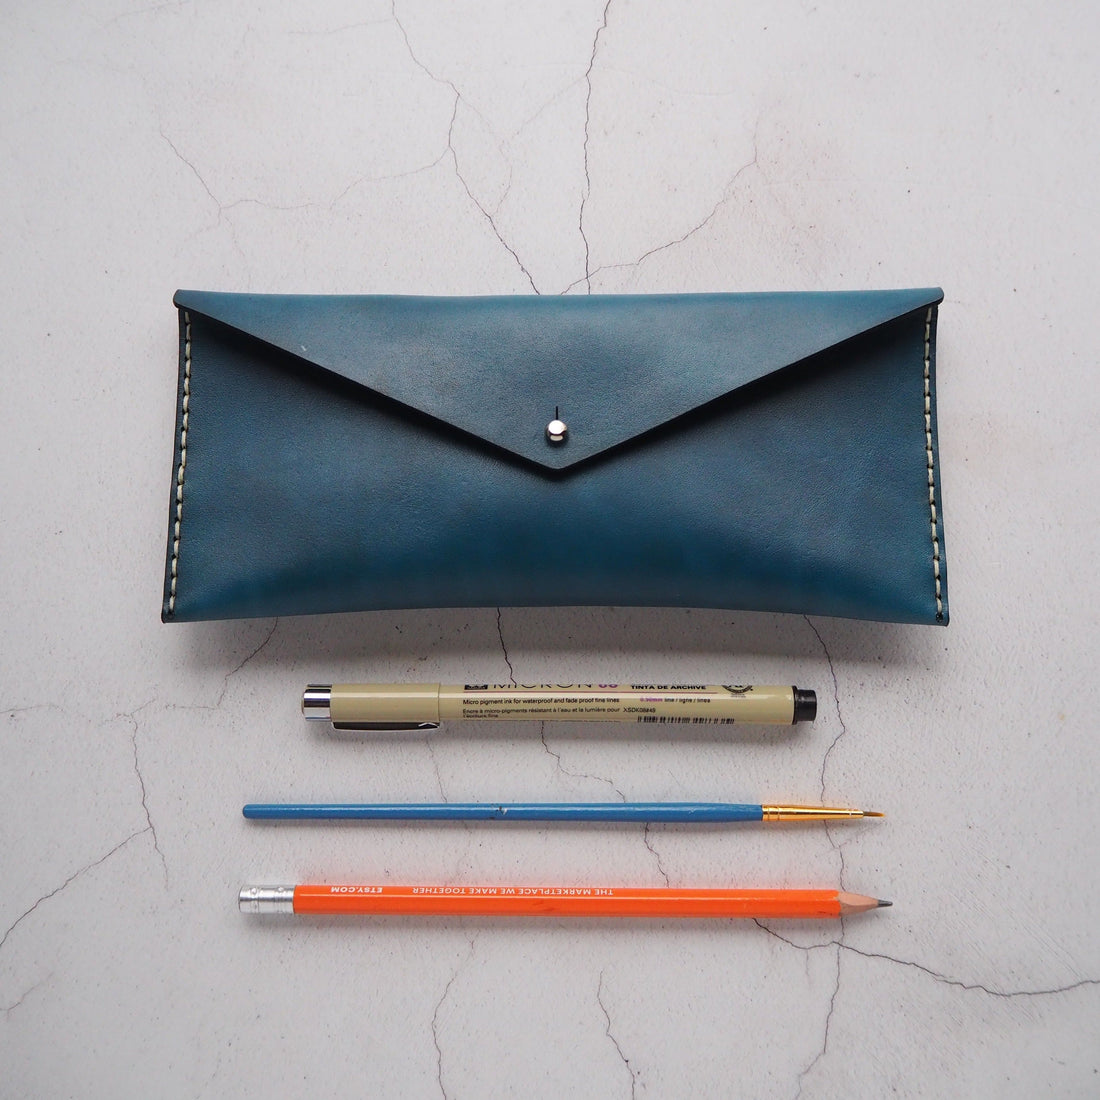  The Dyed Leather Pencil Case, a personalised leather pencil case from Hôrd. 